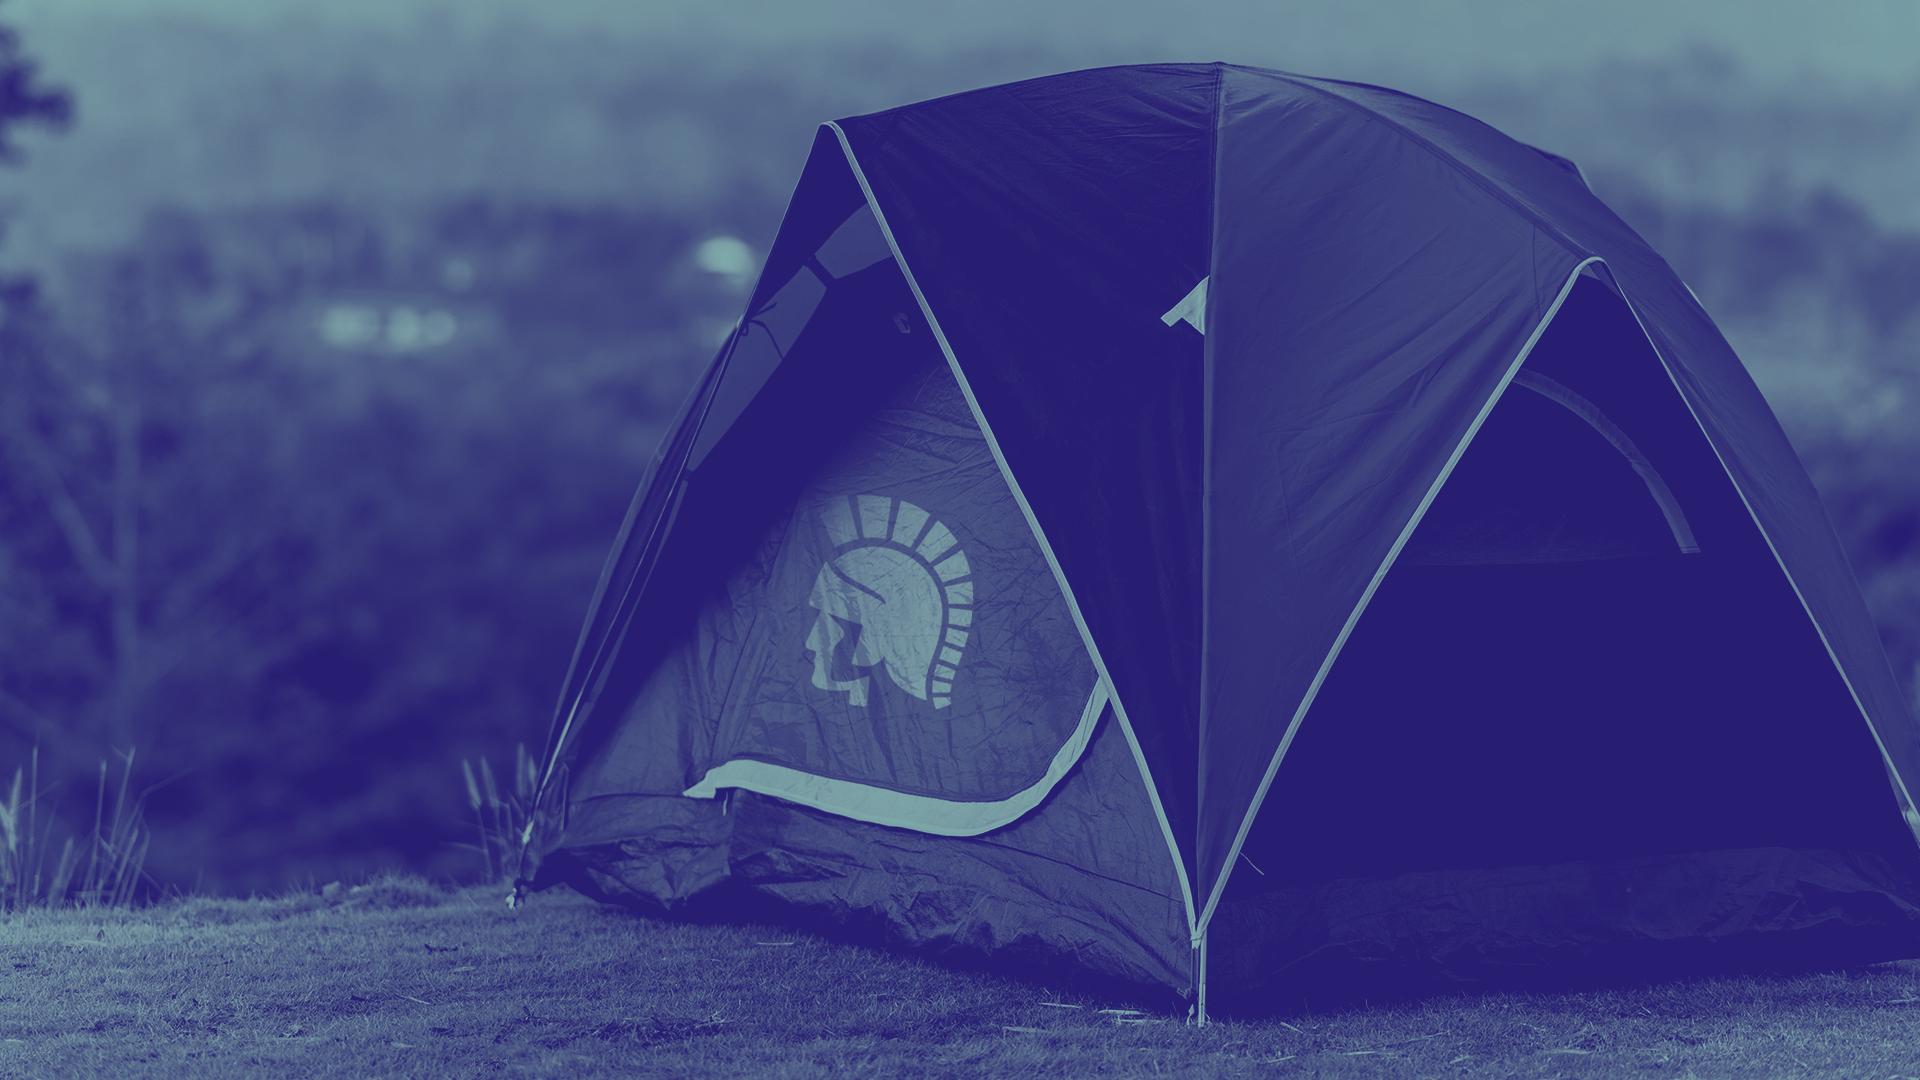 A tent with the Trojan logo on the front set up in a camp ground.